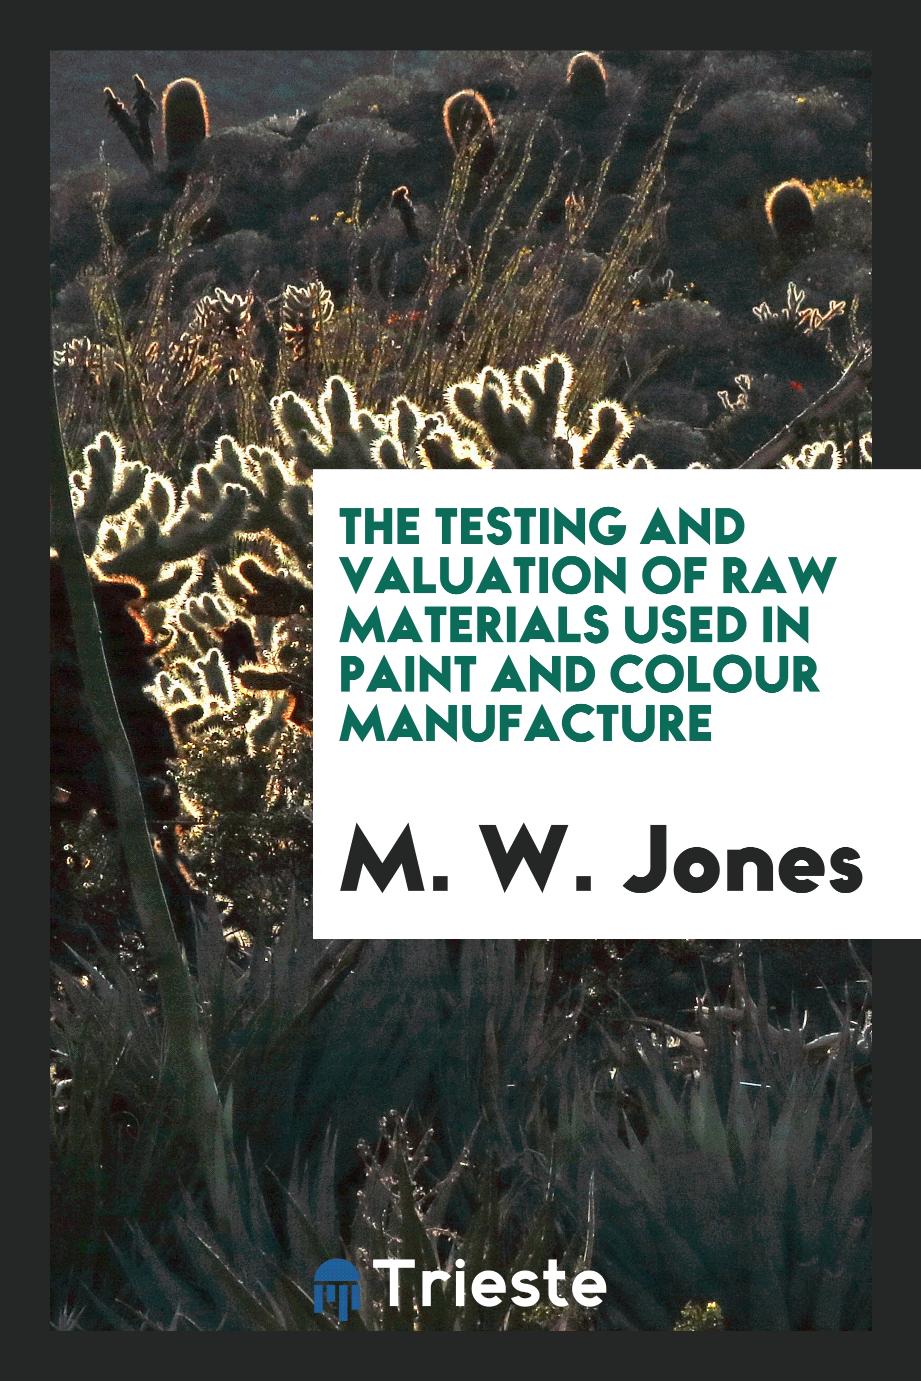 The Testing and Valuation of Raw Materials Used in Paint and Colour Manufacture